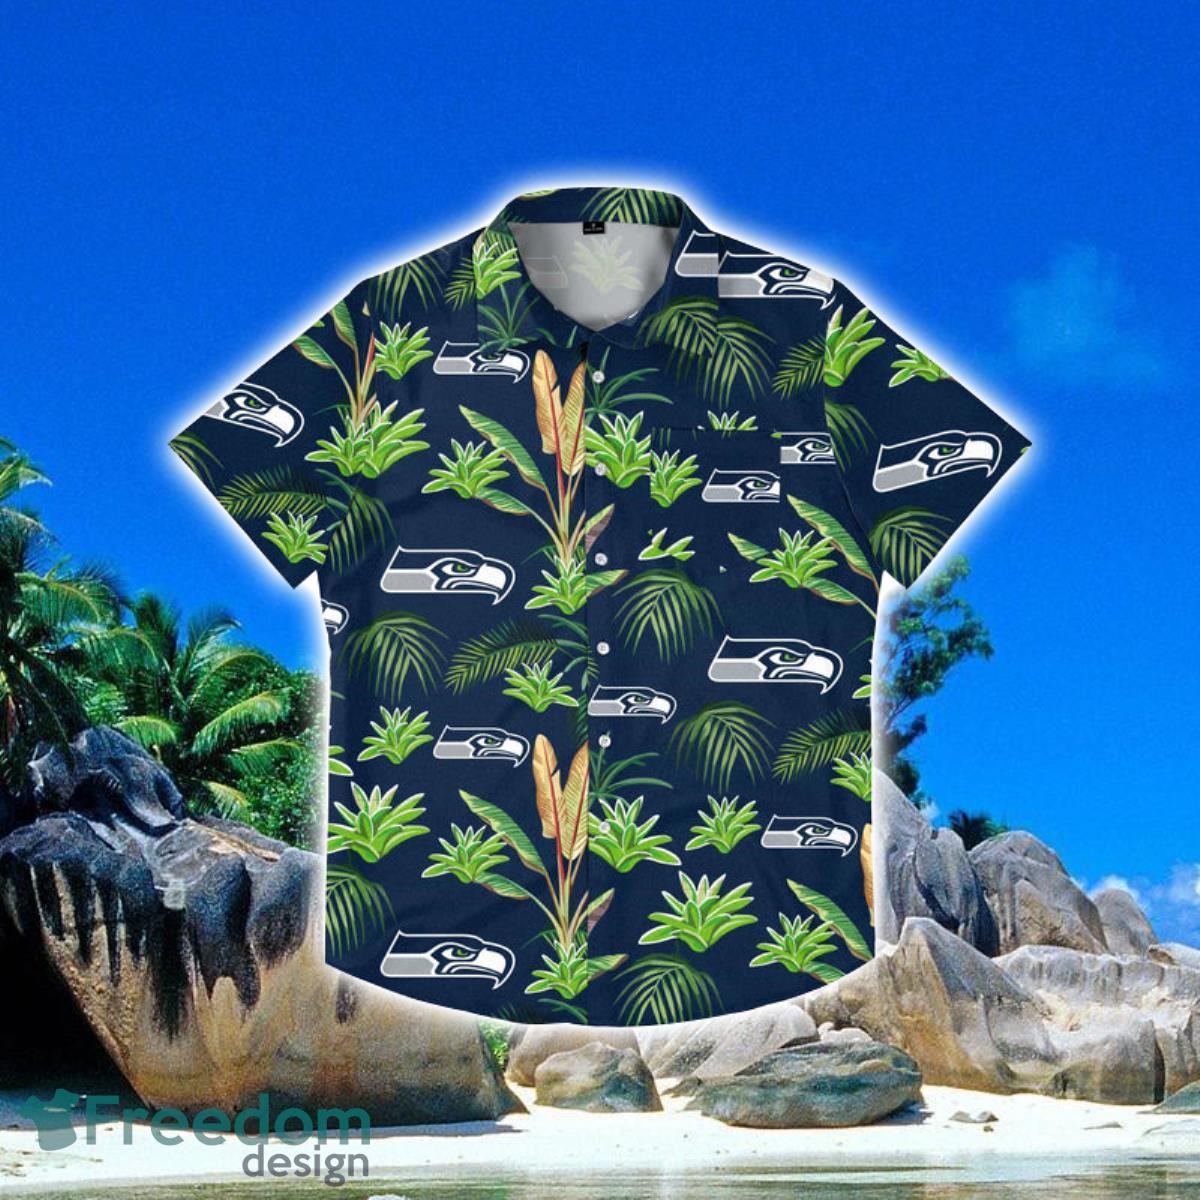 Seattle Seahawks NFL Black Floral Hawaiian Shirt Special Gift For Fans -  Freedomdesign